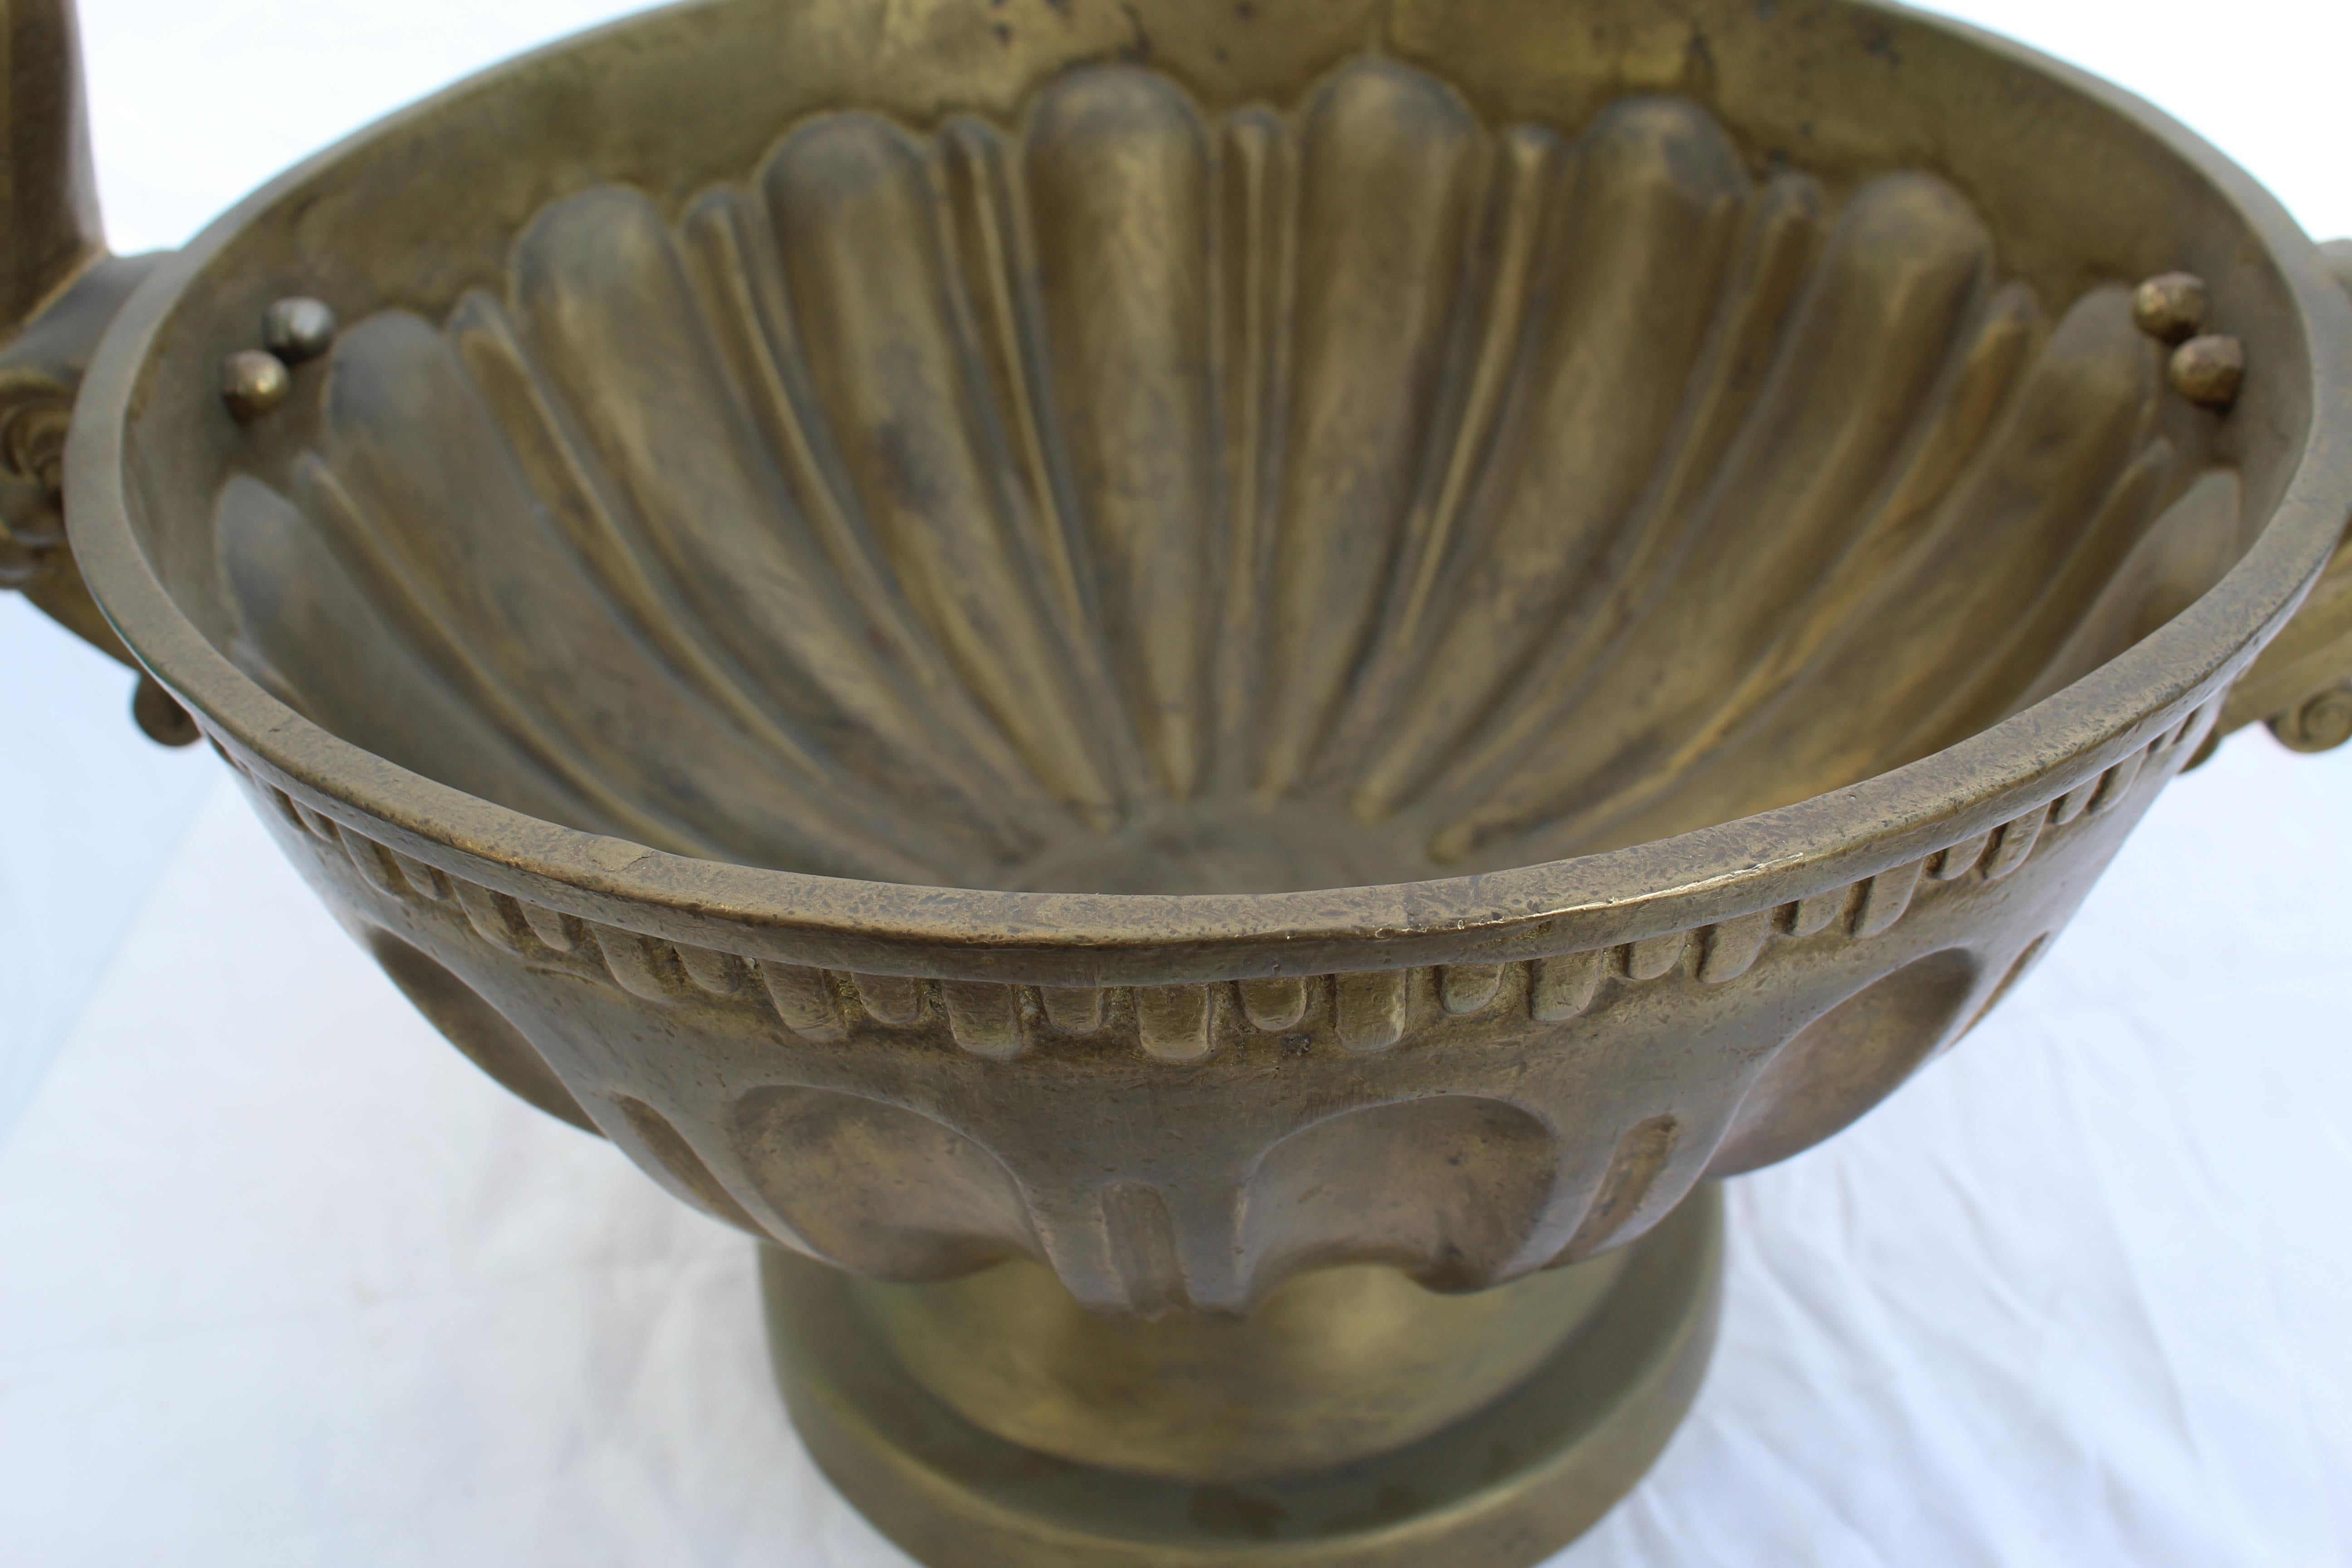 A good size centerpiece bowl. Solid cast brass with an antique finish, heavy casting. Double handles. About 16 